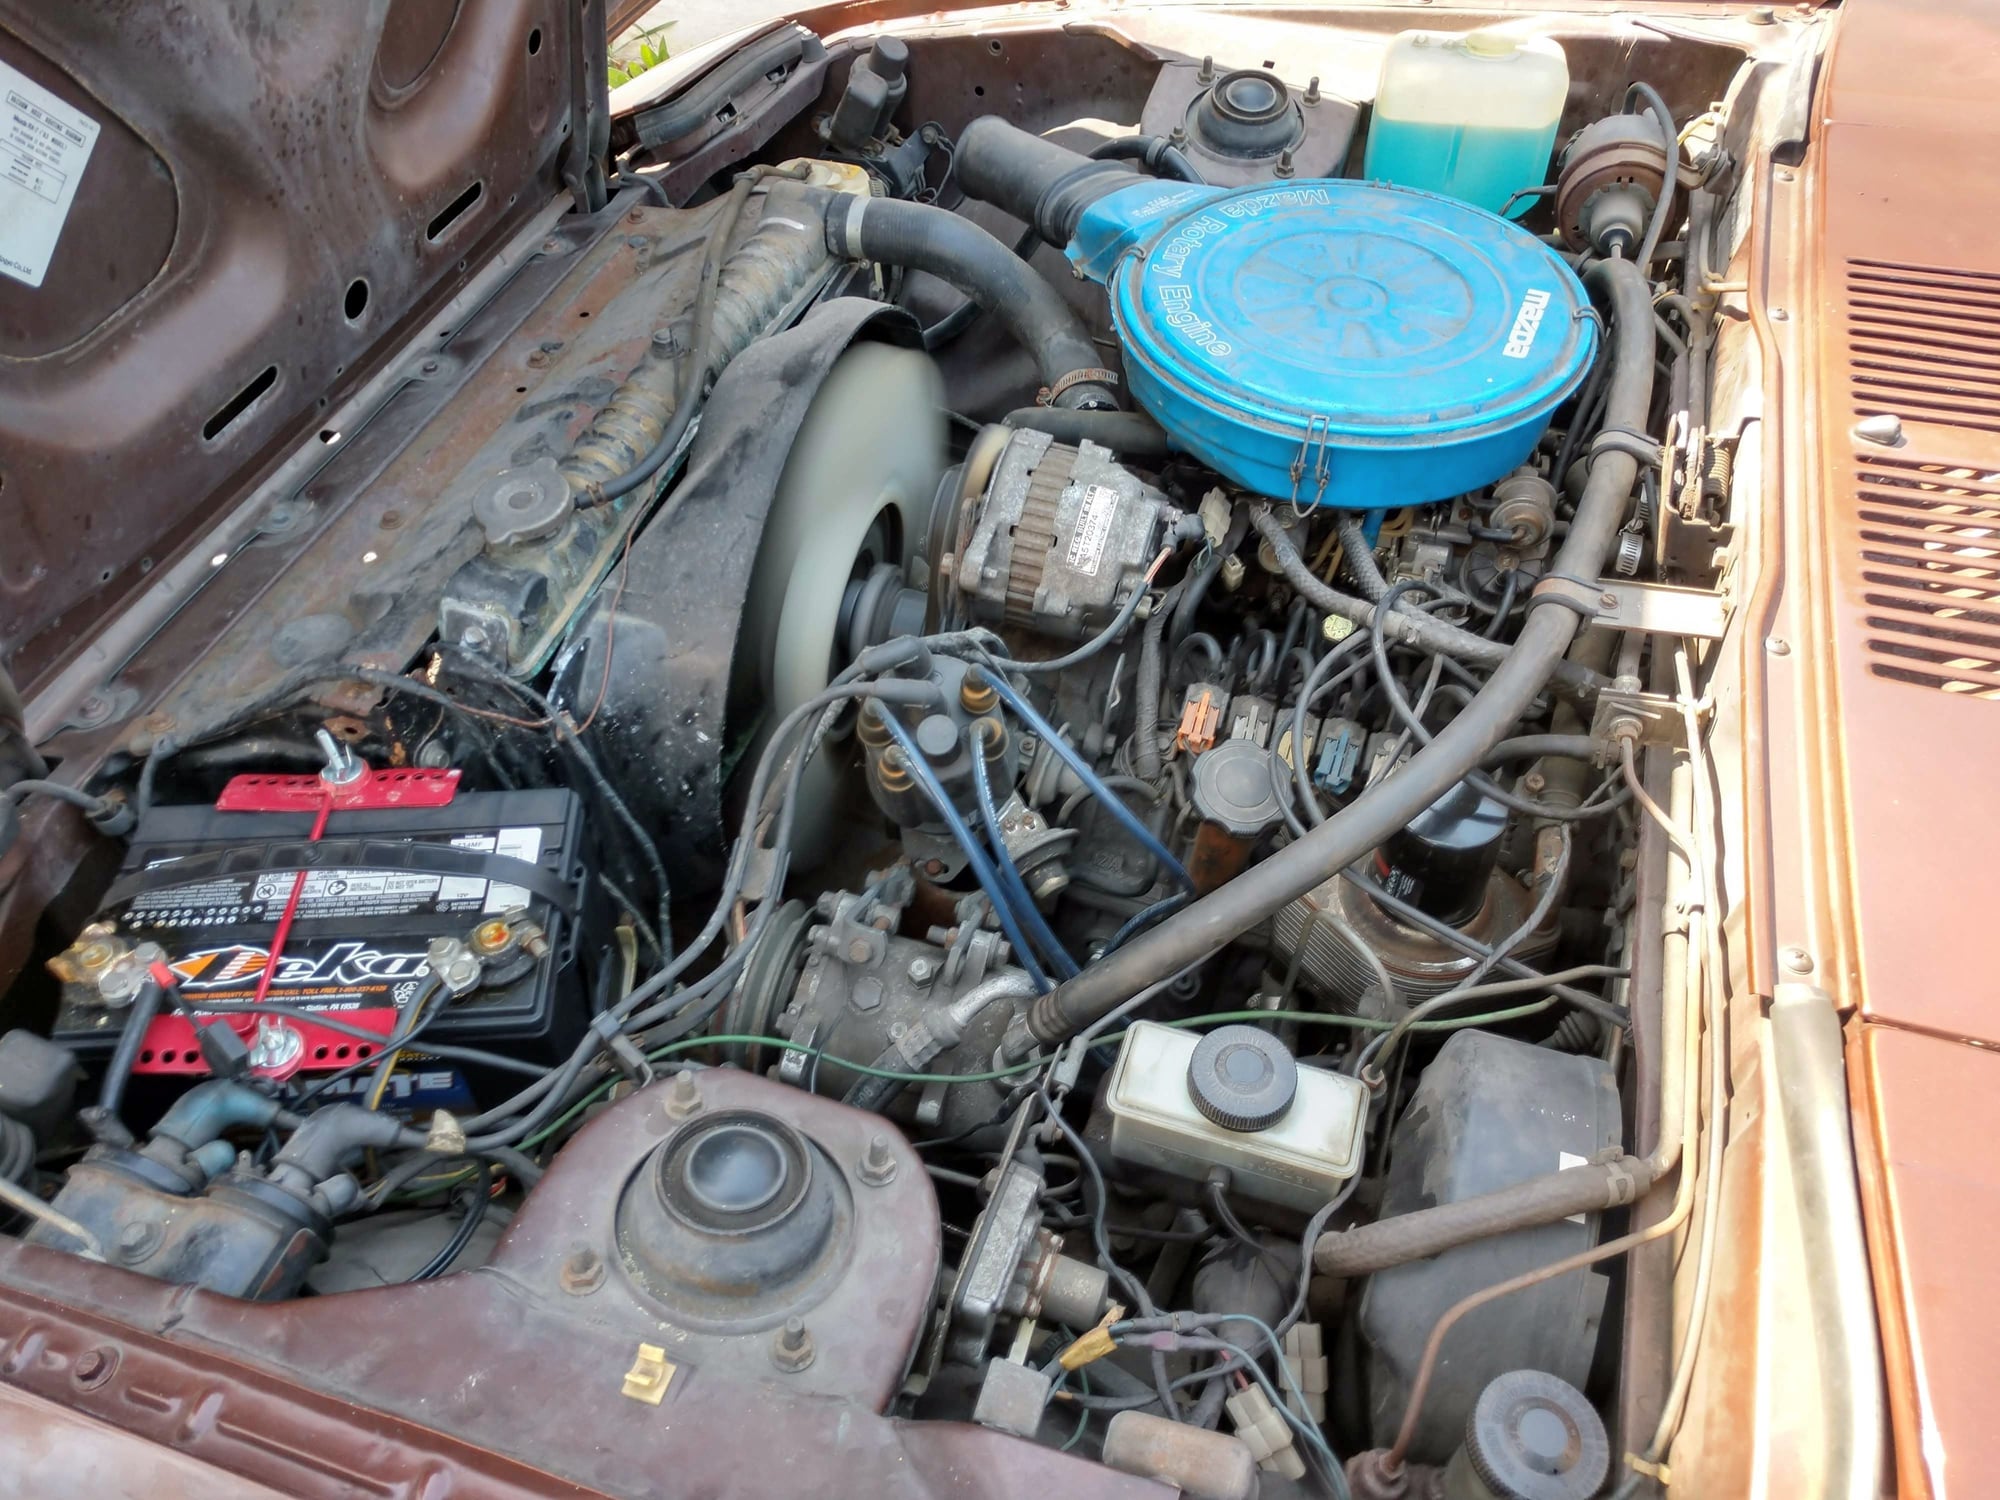 Engine - Complete - Running 12A and 5 speed - Used - 1981 to 1985 Mazda RX-7 - Bloomsburg, PA 17815, United States